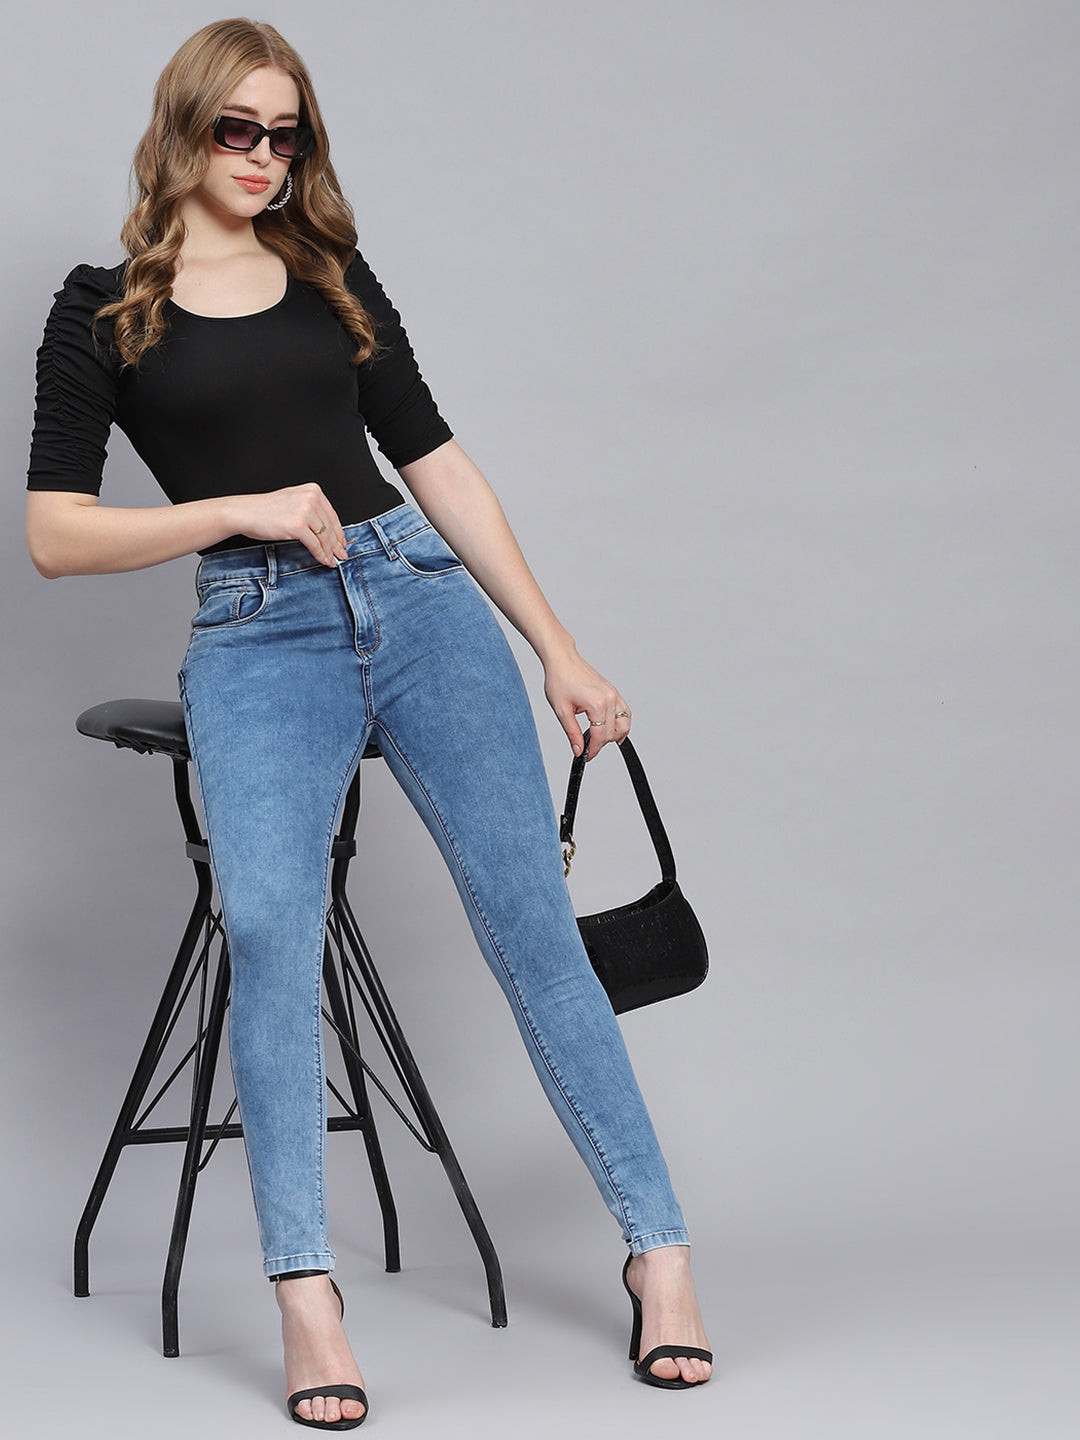 Relaxed Fit Womens Jeans - Buy Relaxed Fit Womens Jeans Online at Best  Prices In India | Flipkart.com